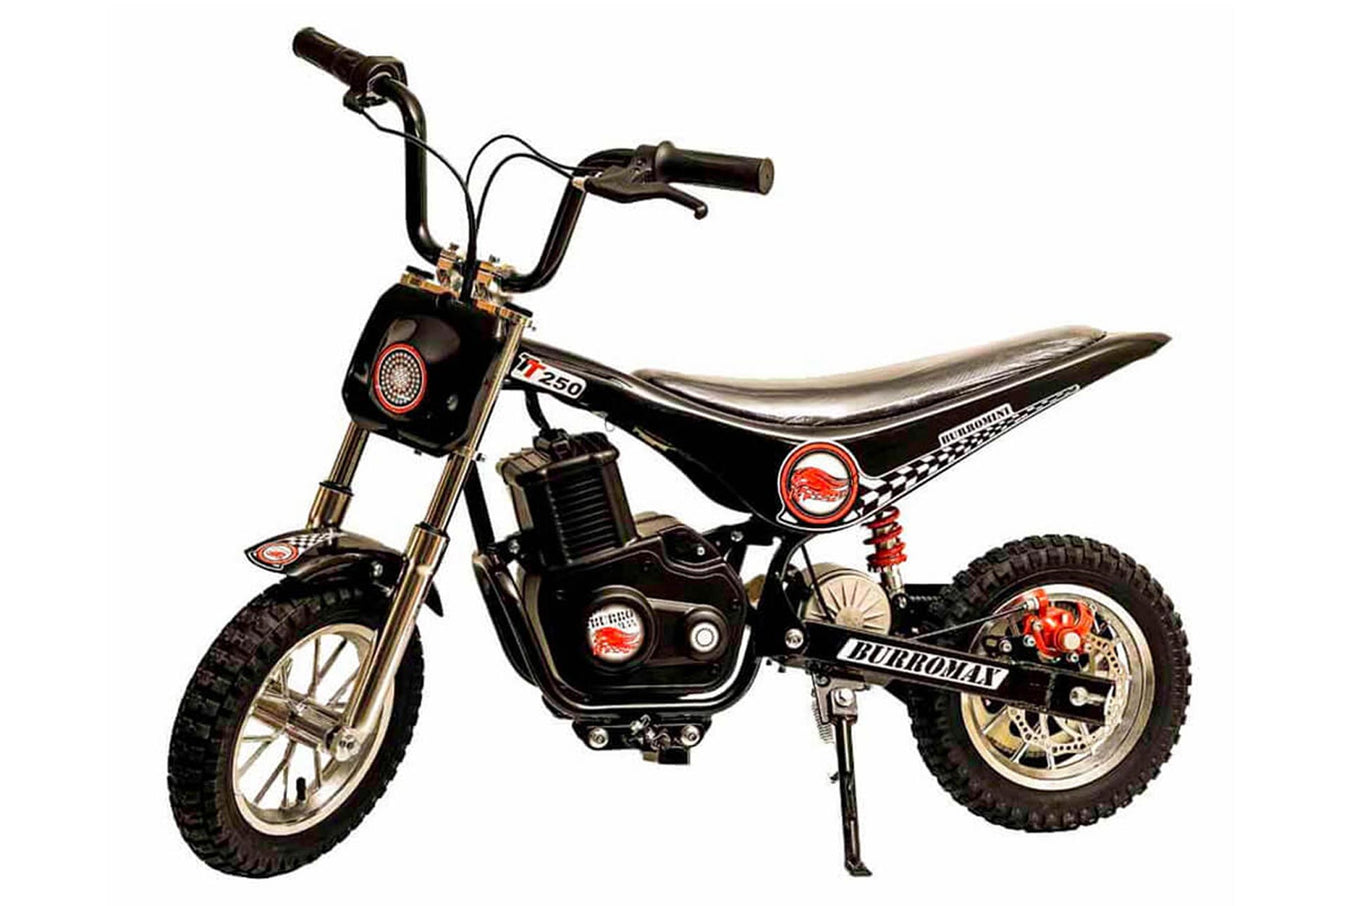 Type: Boot / Last Mile E Scooters